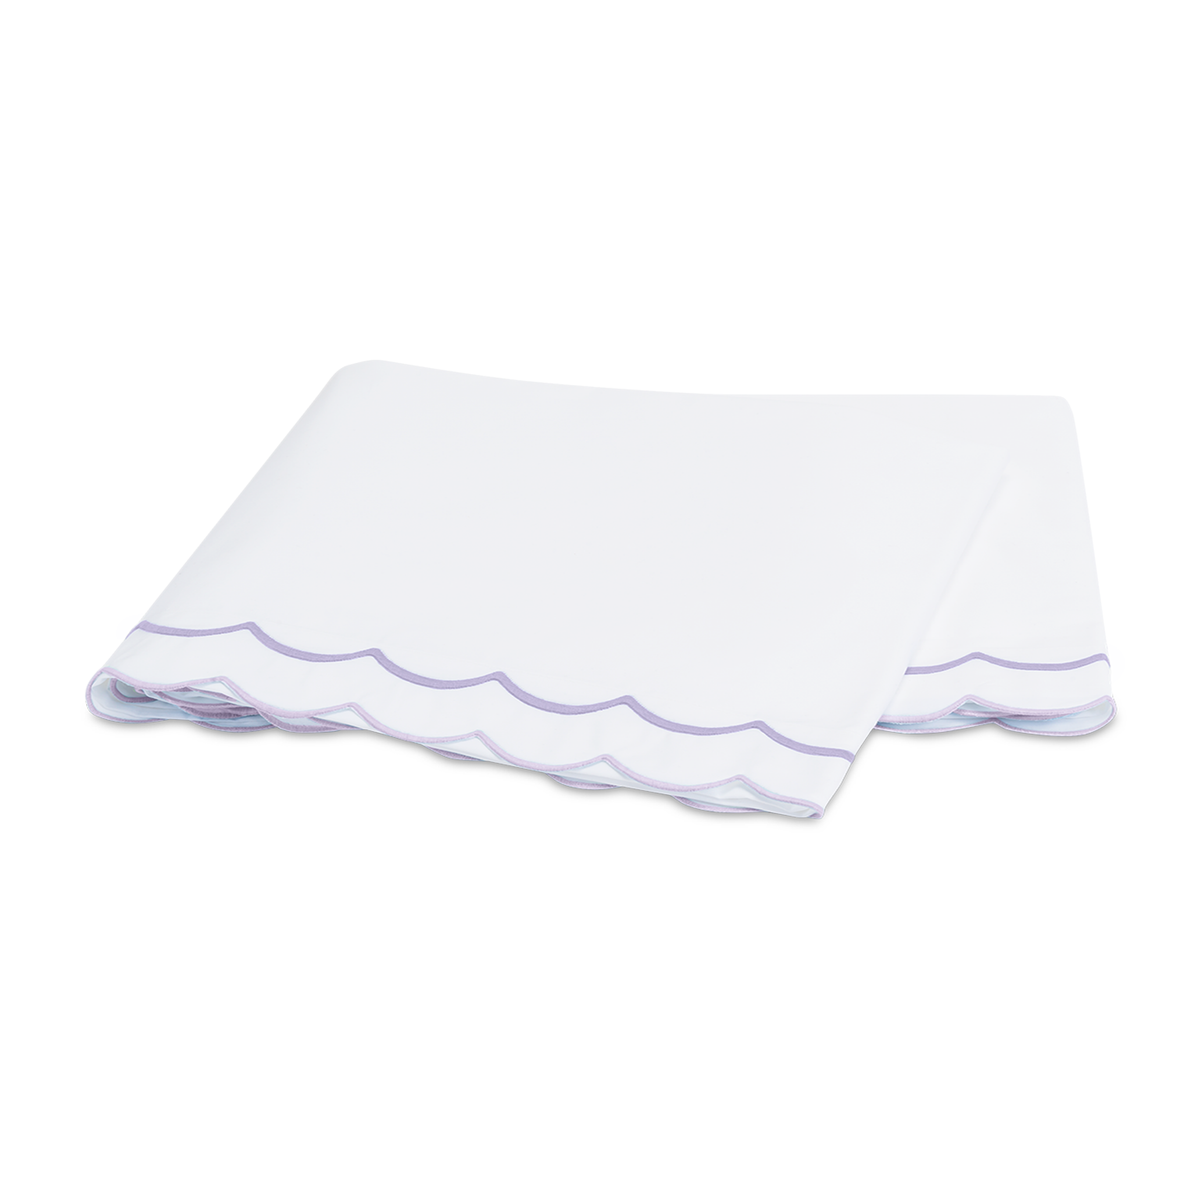 Flat Sheet of Matouk India Bedding in Lilac Color